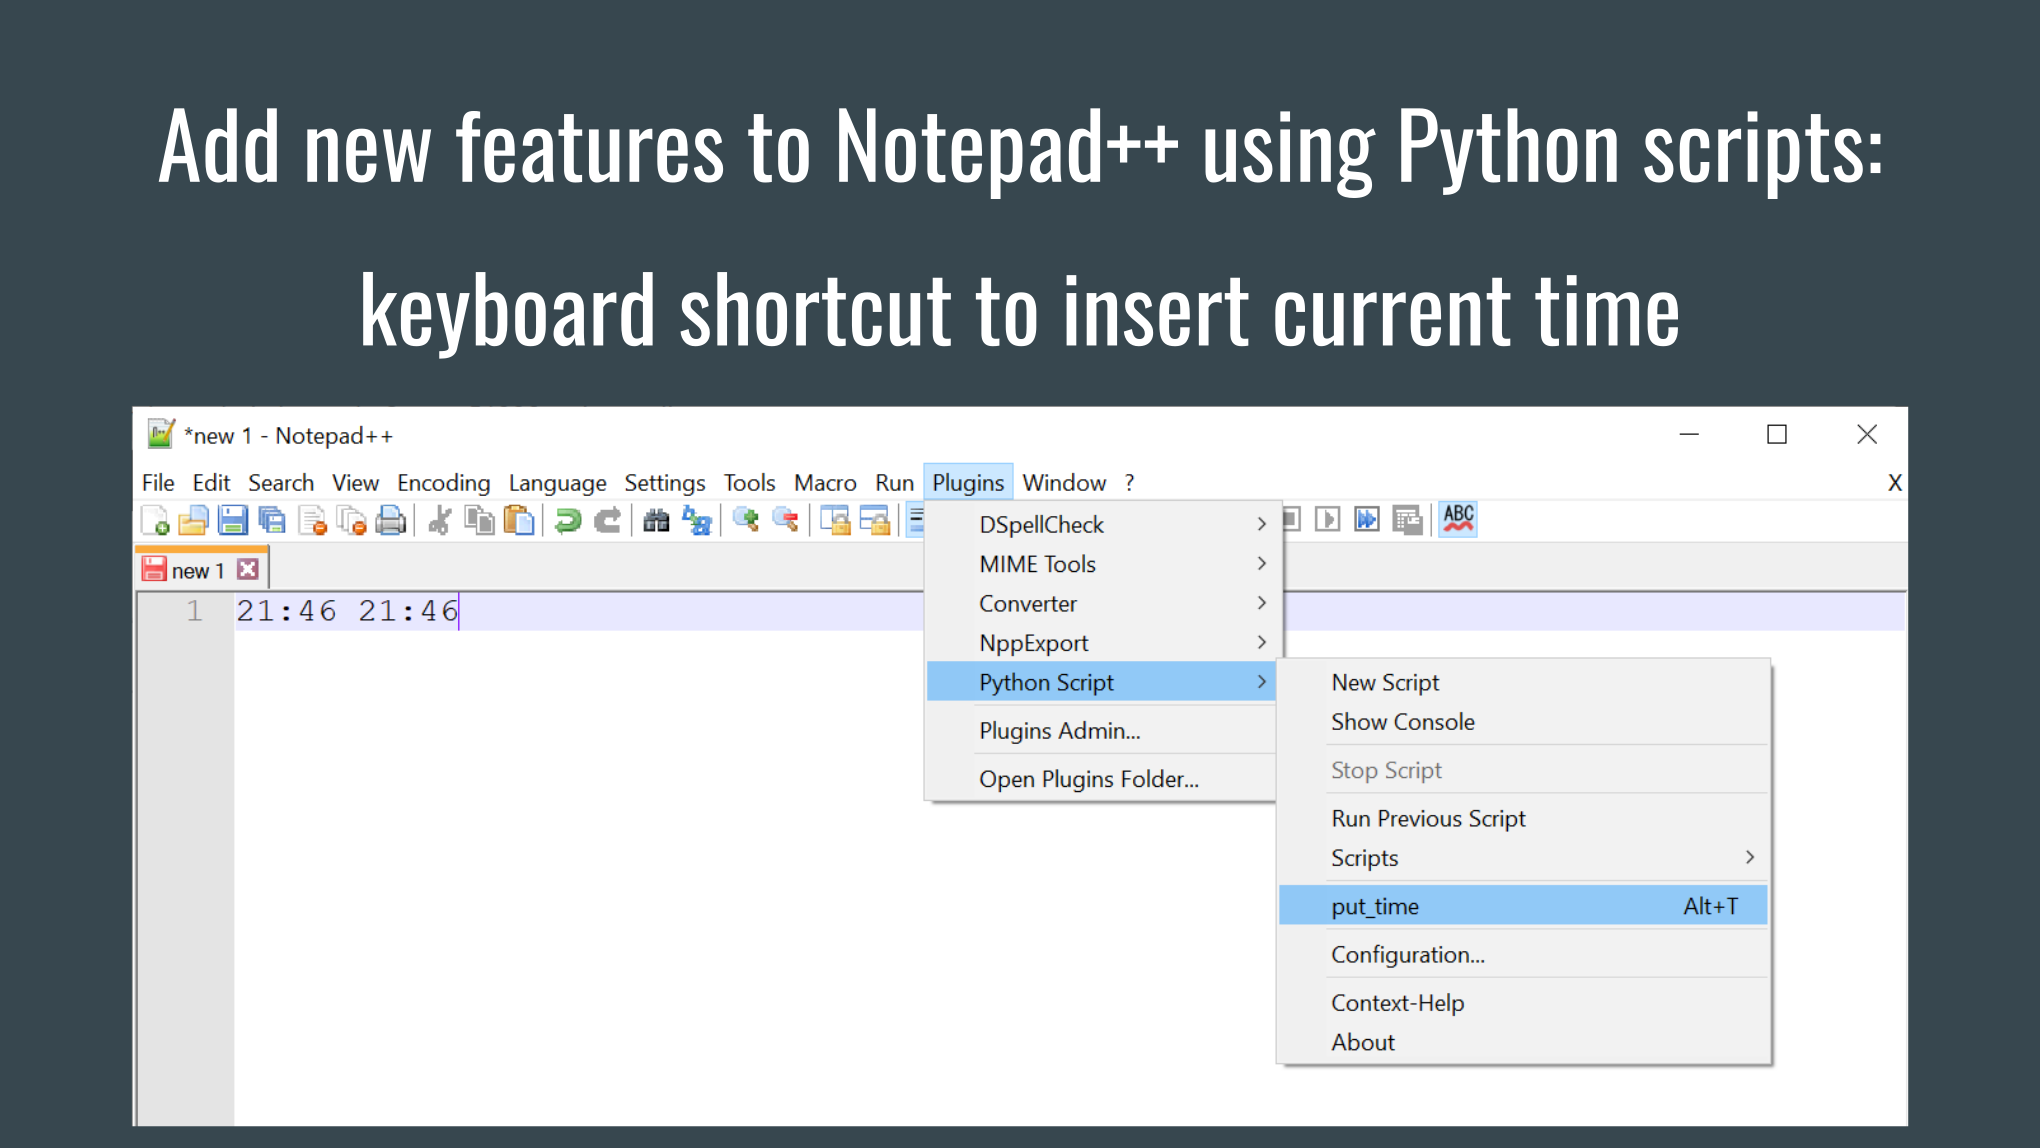 Add new features to Notepad++ using Python scripts: keyboard shortcut to insert current time
